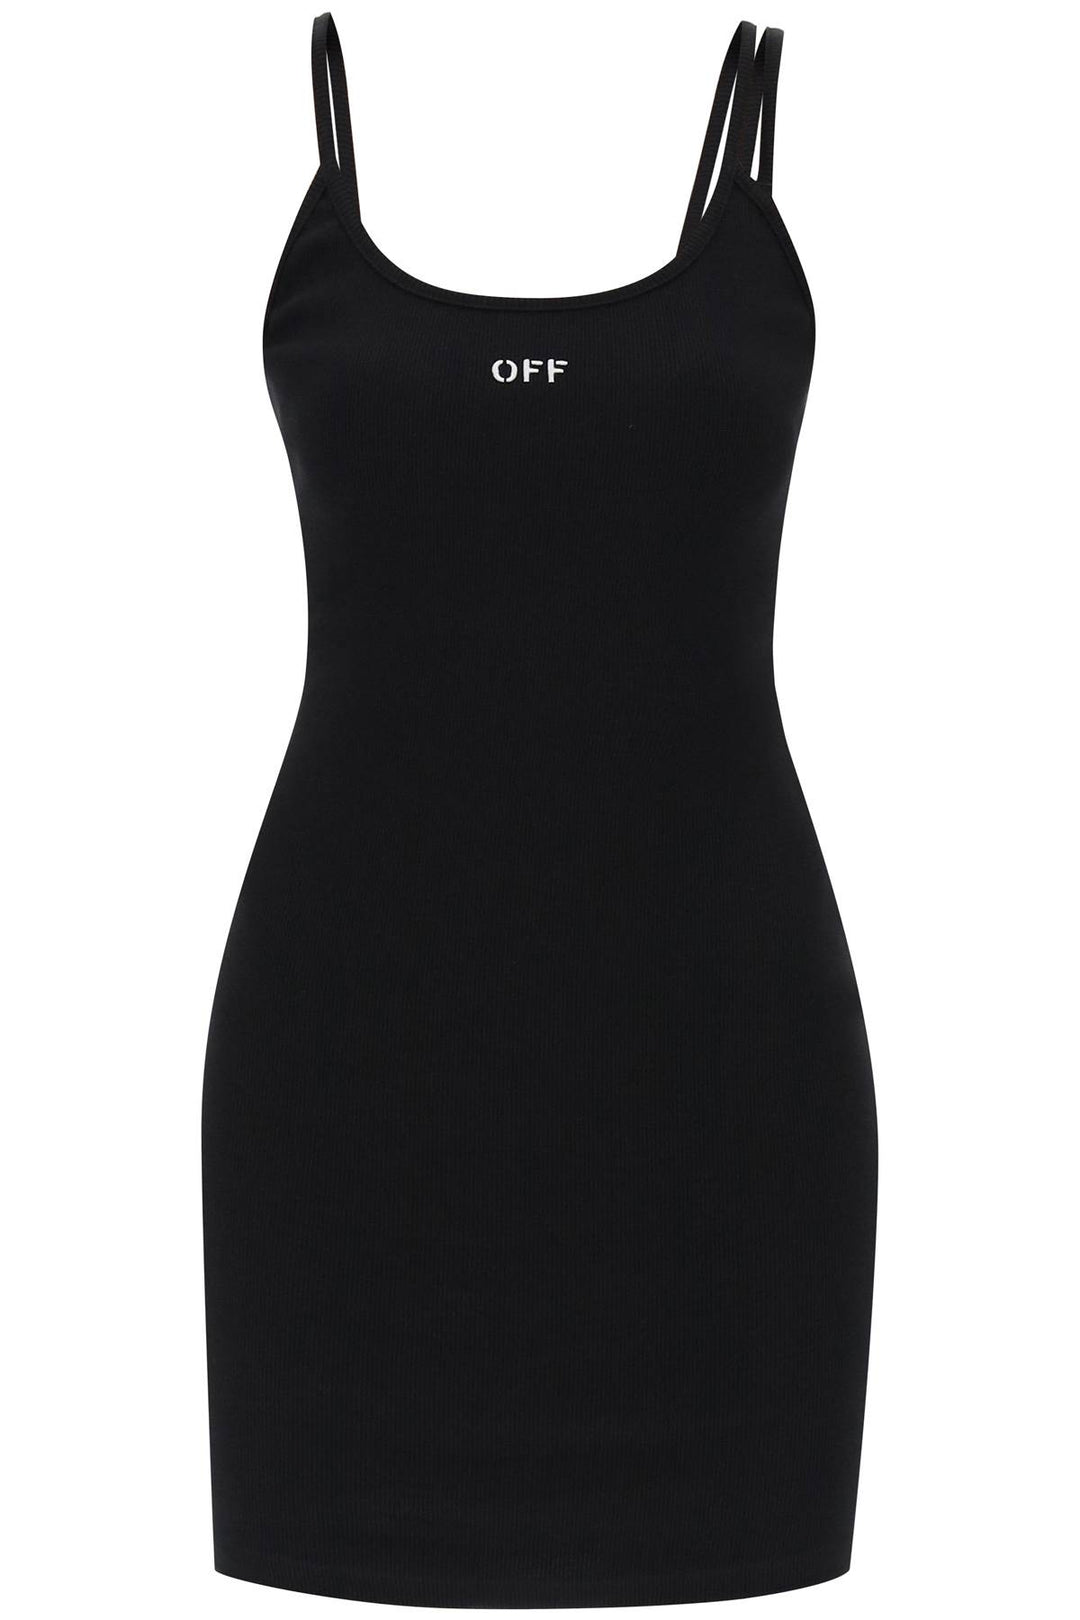 Off White Tank Dress With Off Embroidery   Nero